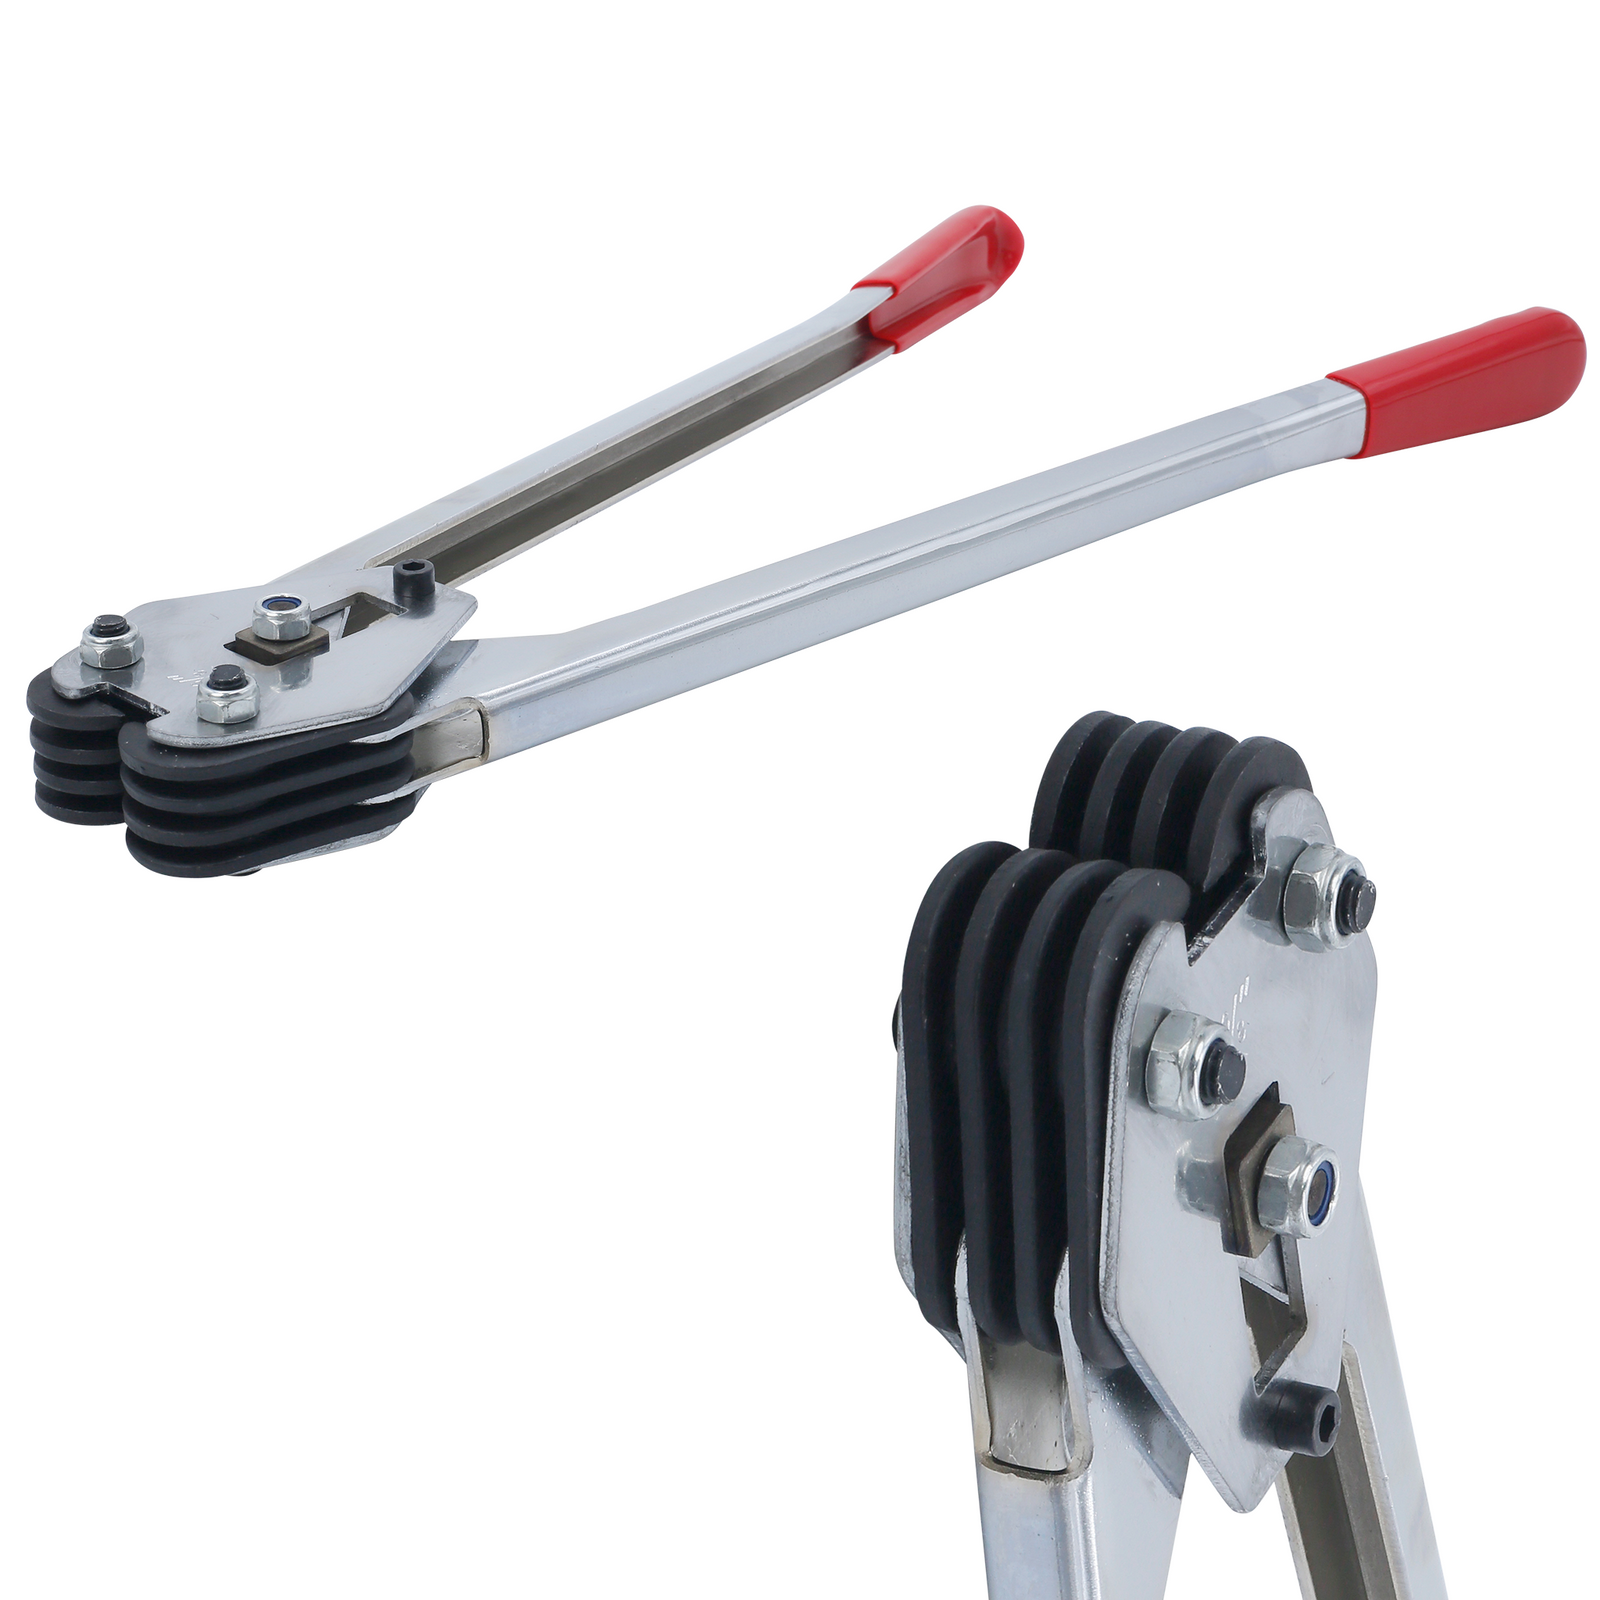 Manual Strapping Tensioning and Cutting Tool for Plastic Straps by JORES Technologies